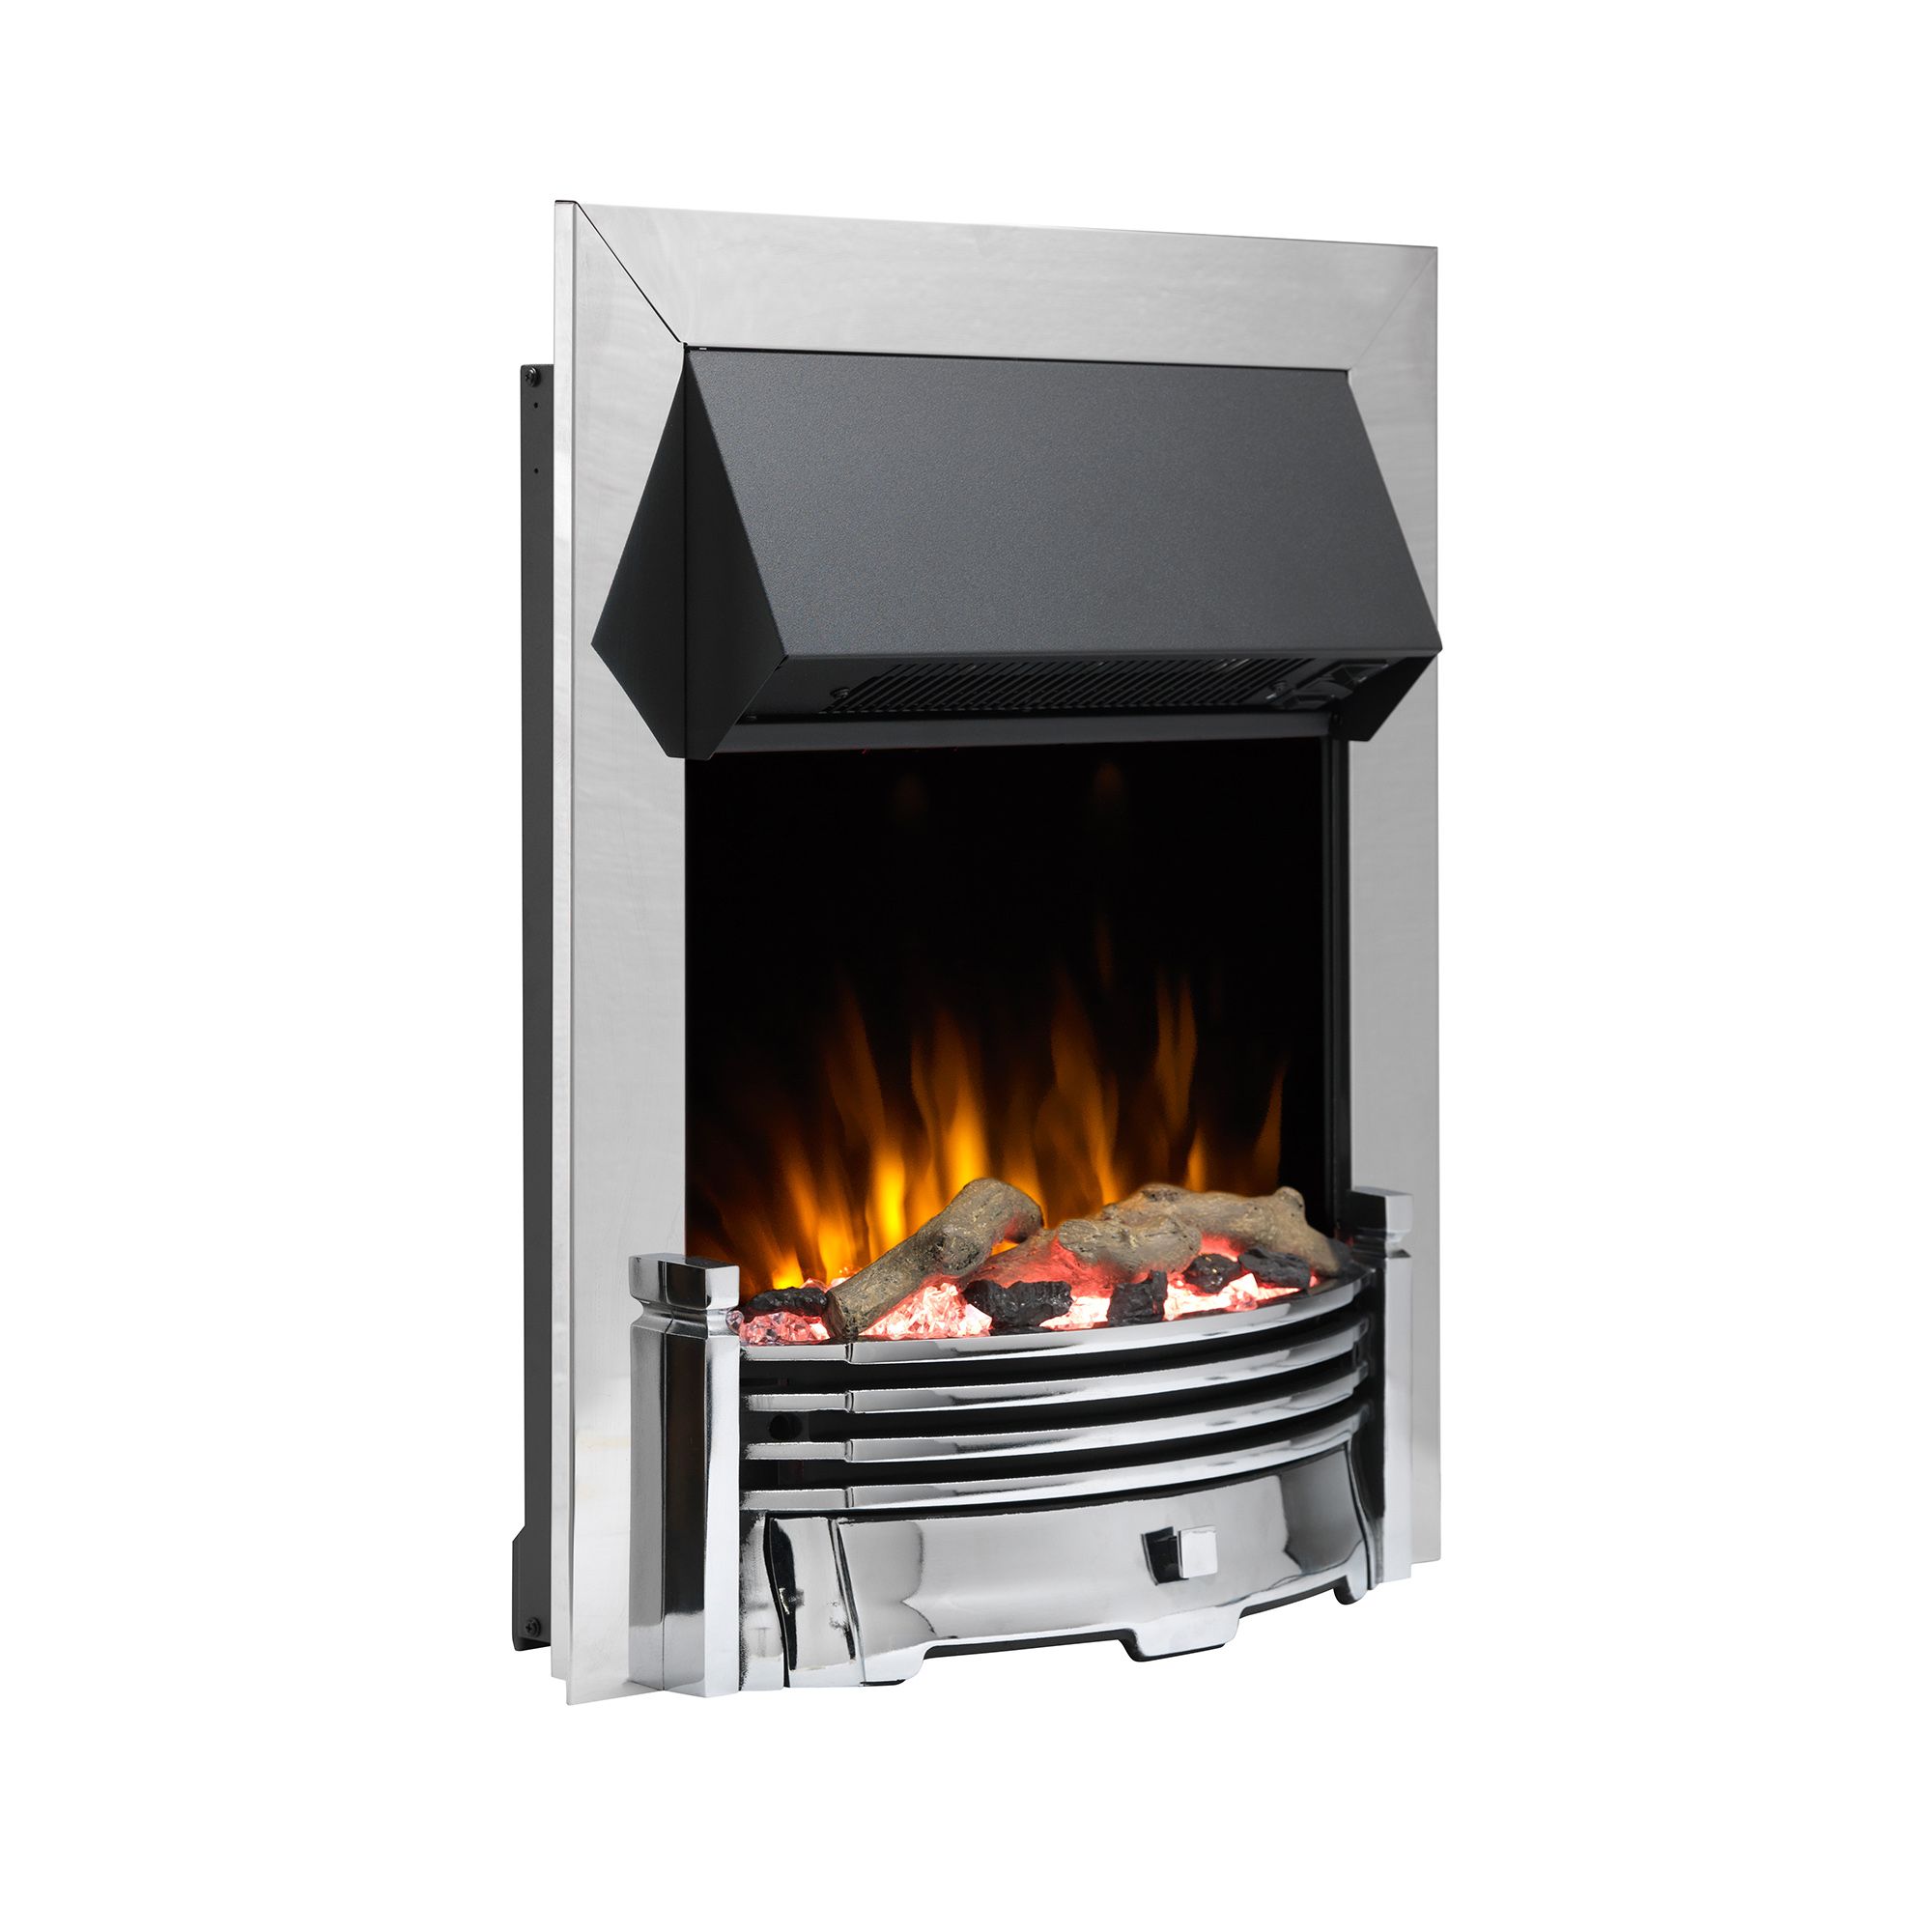 Dimplex Optiflame 2kW Chrome effect Electric Fire